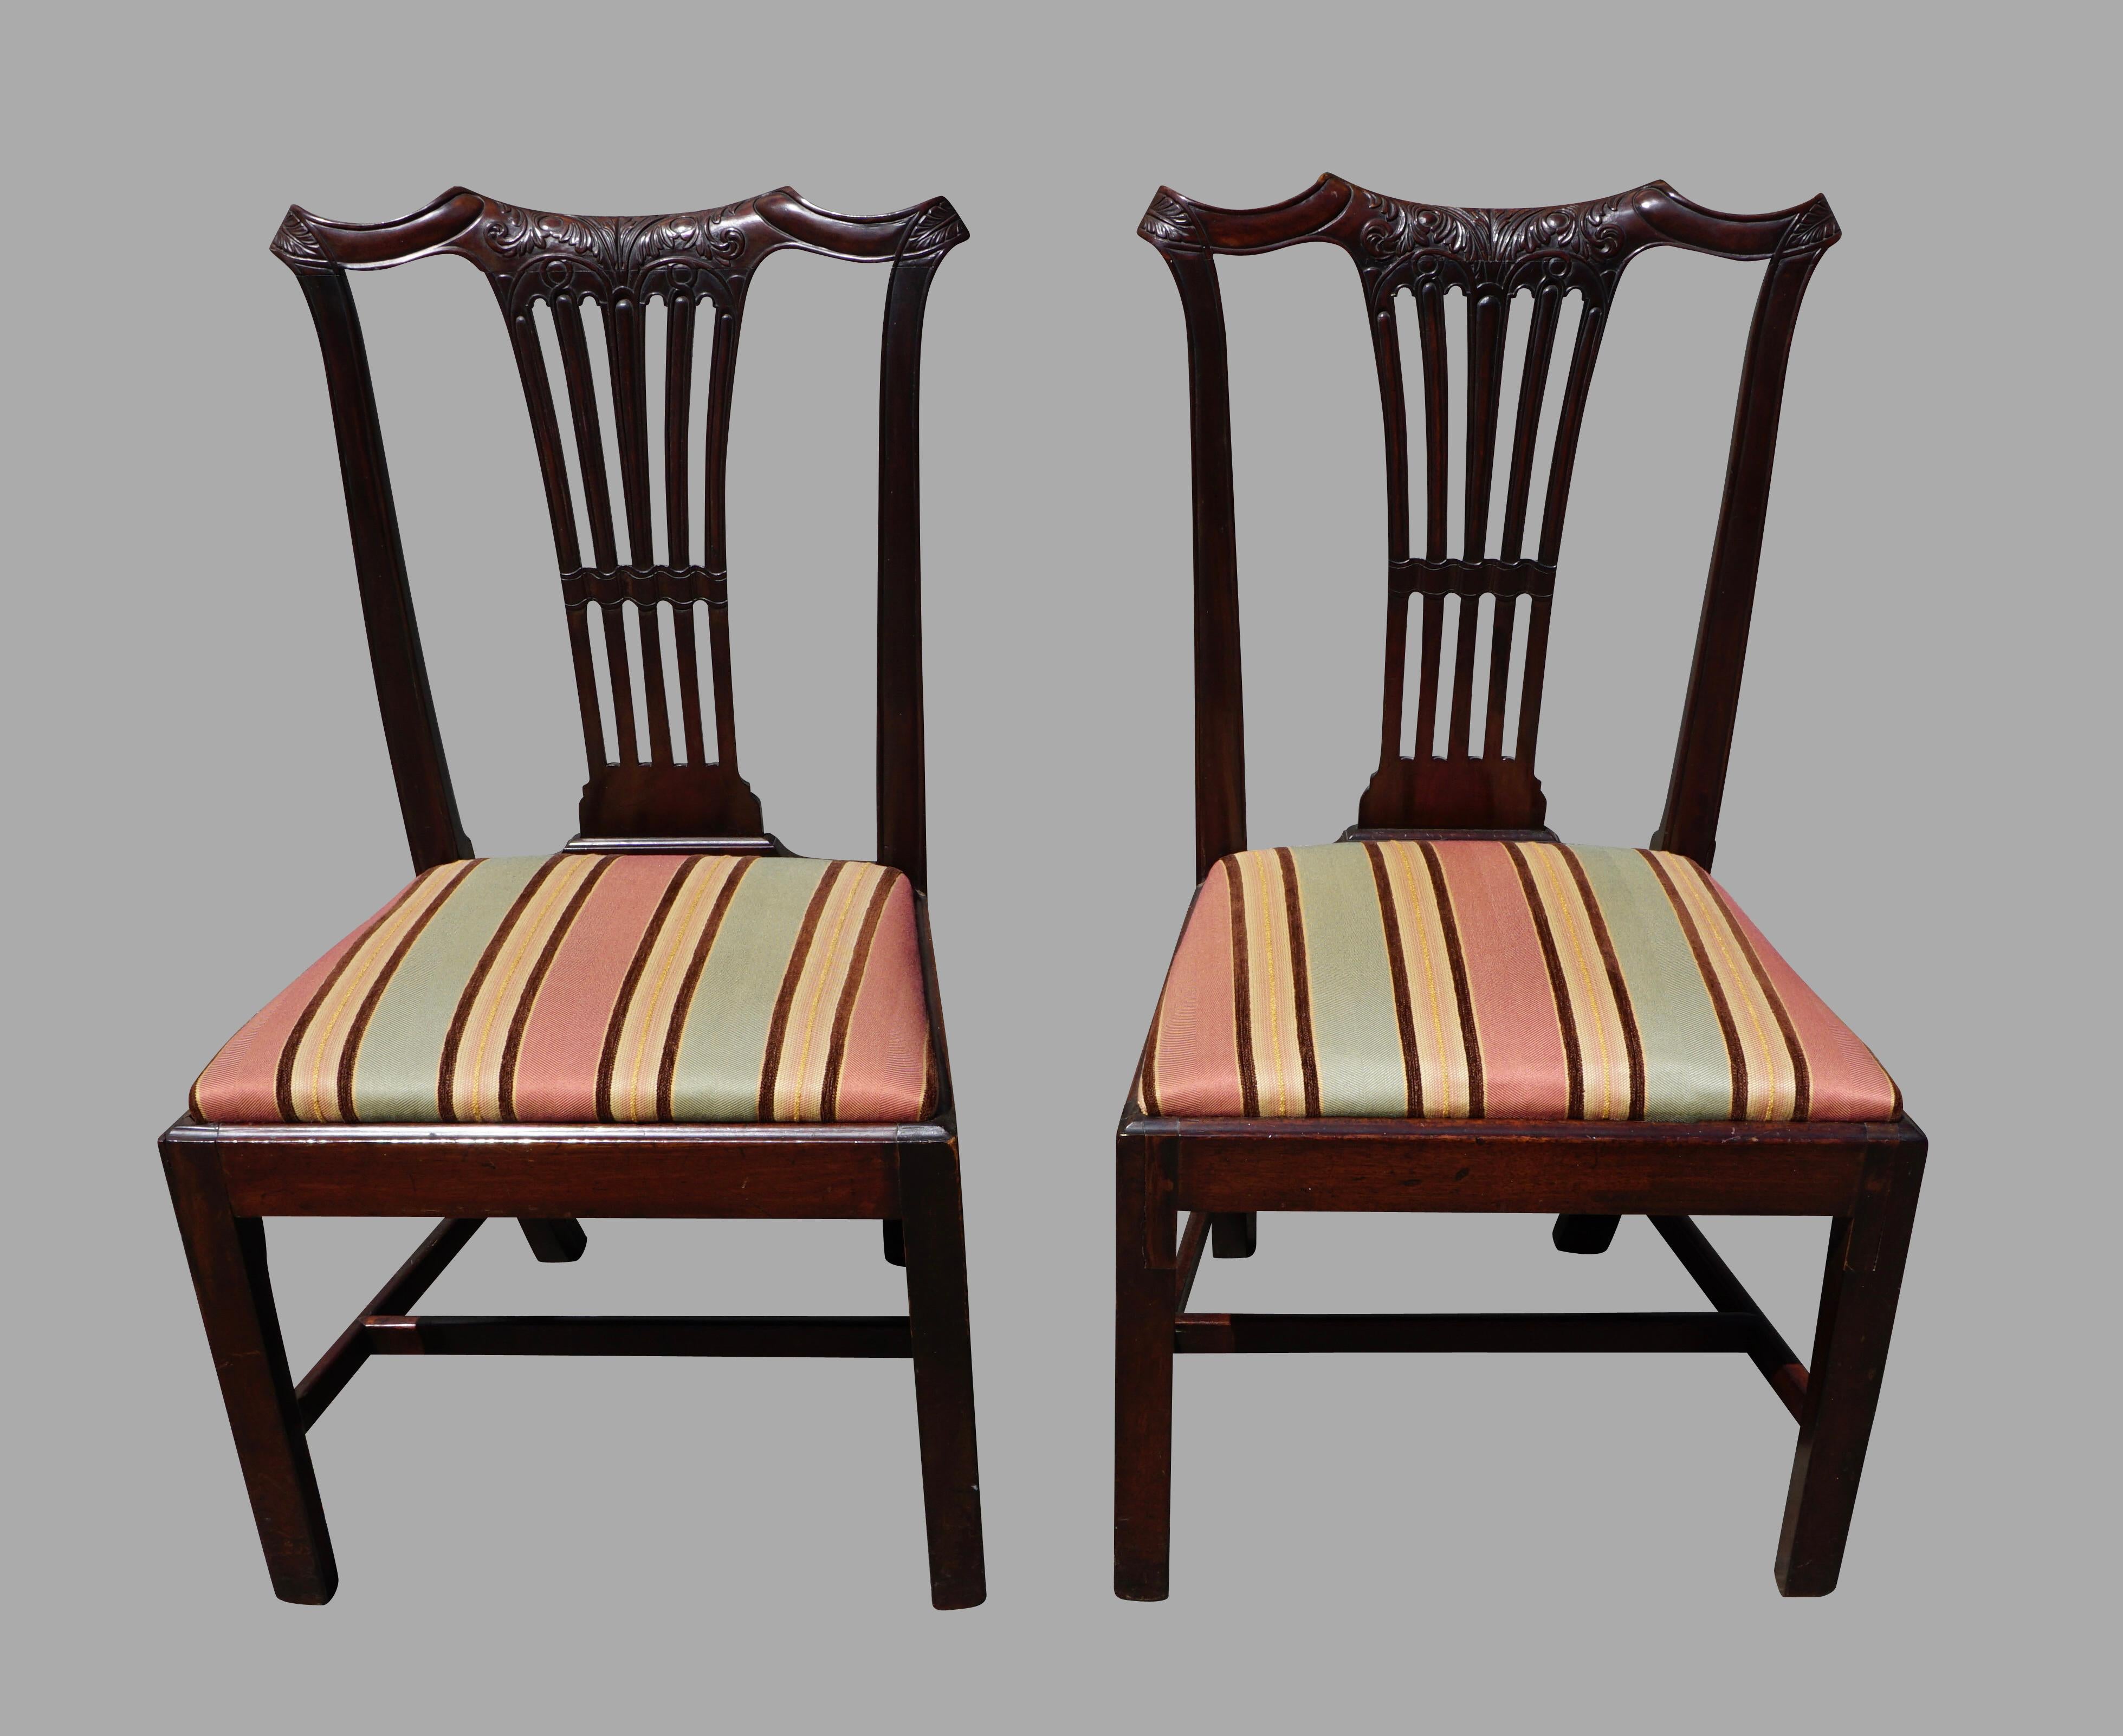 A pair of English Georgian late 18th century mahogany side chairs, each with a shaped and well-carved crestrail over a carved central open splat, the drop in seats covered in striped fabric all supported by square legs. These chairs have good scale,